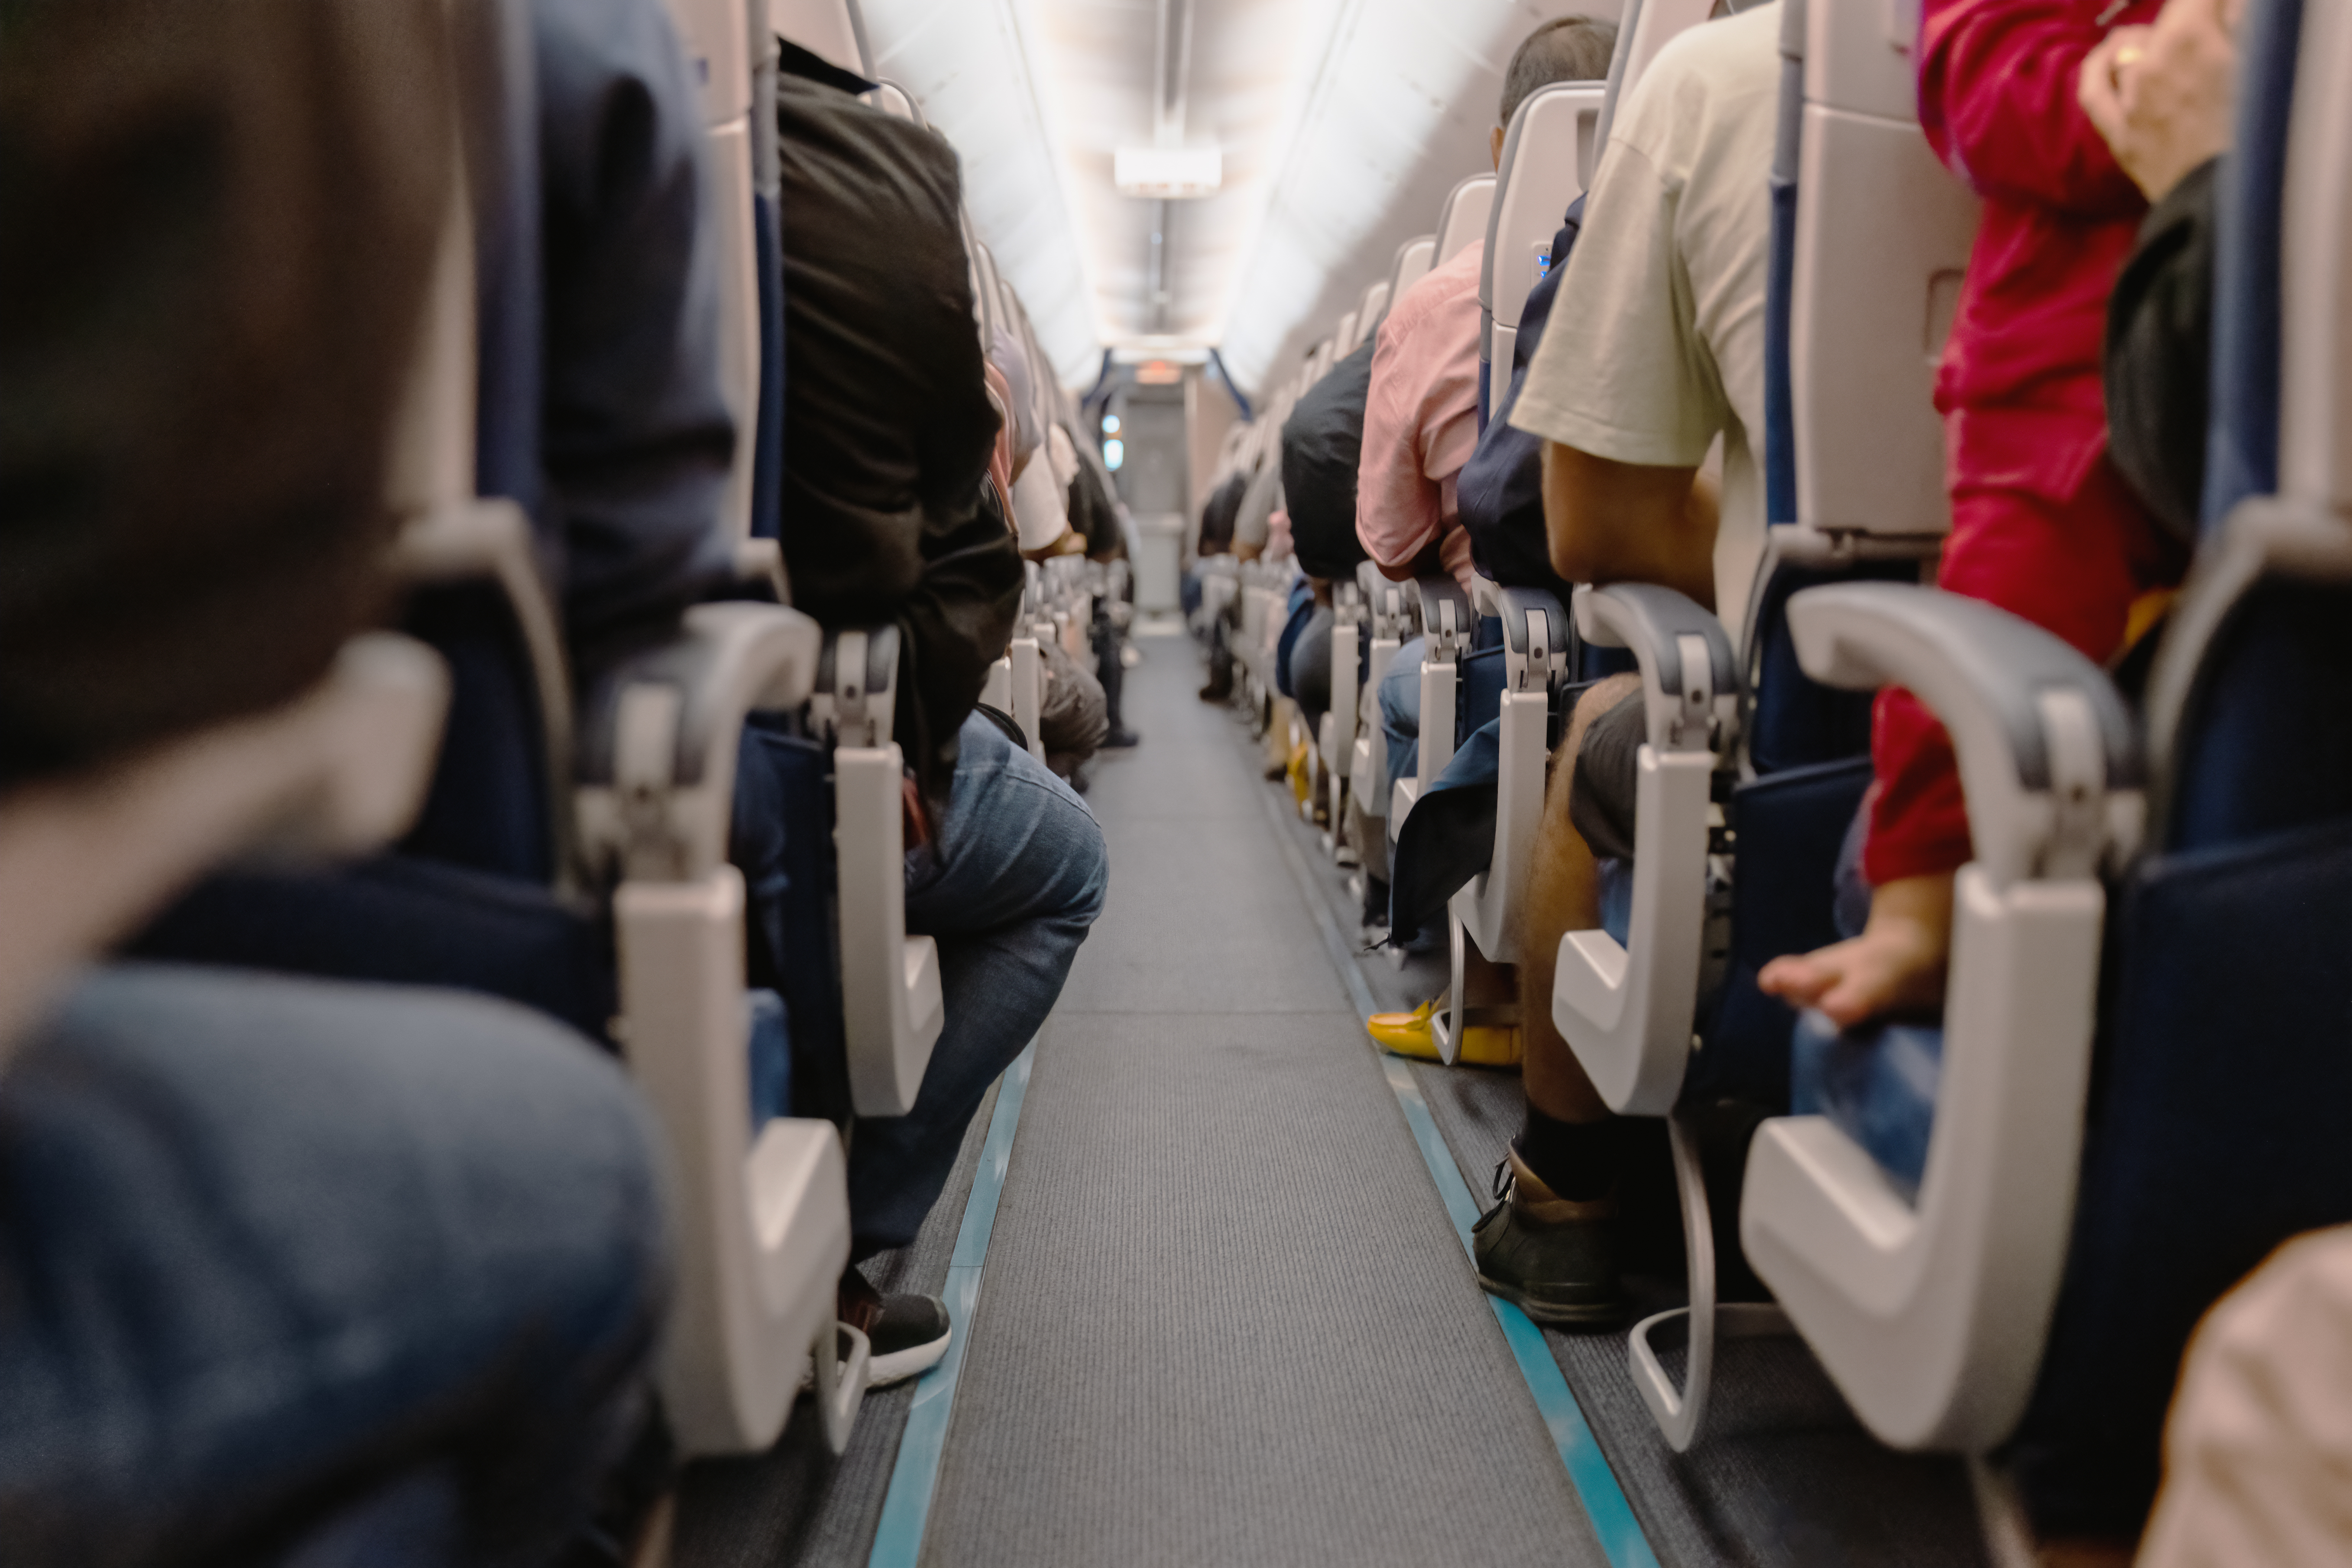 Those sitting in aisle seats can stretch their legs out (stock image)